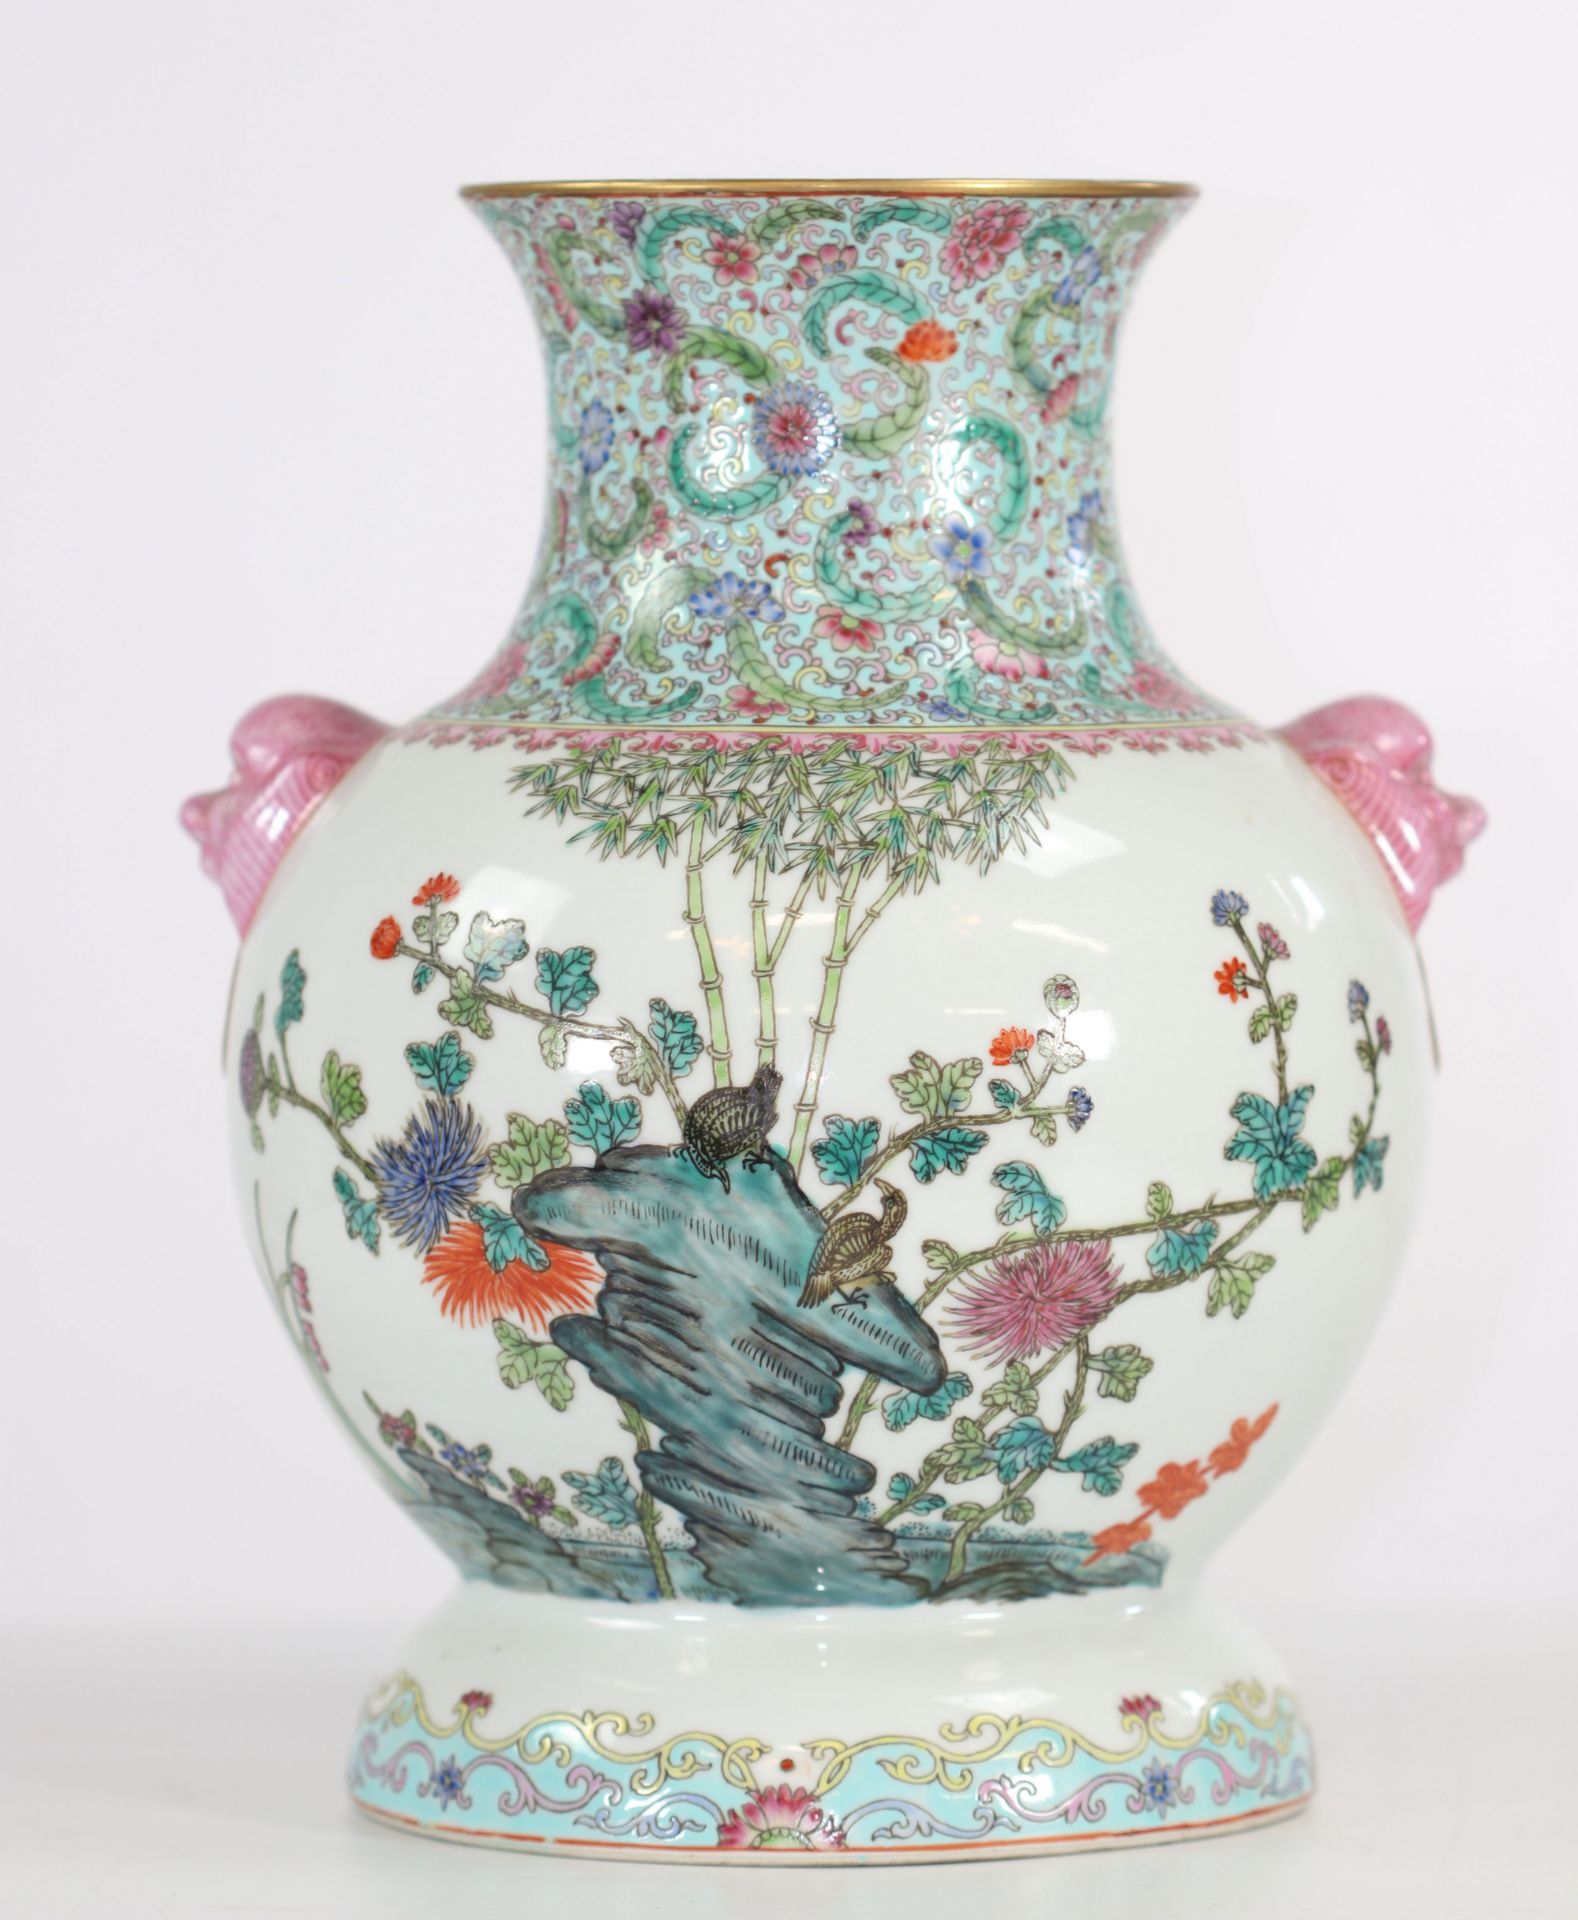 China porcelain vase decorated with quail republic period mark under the piece